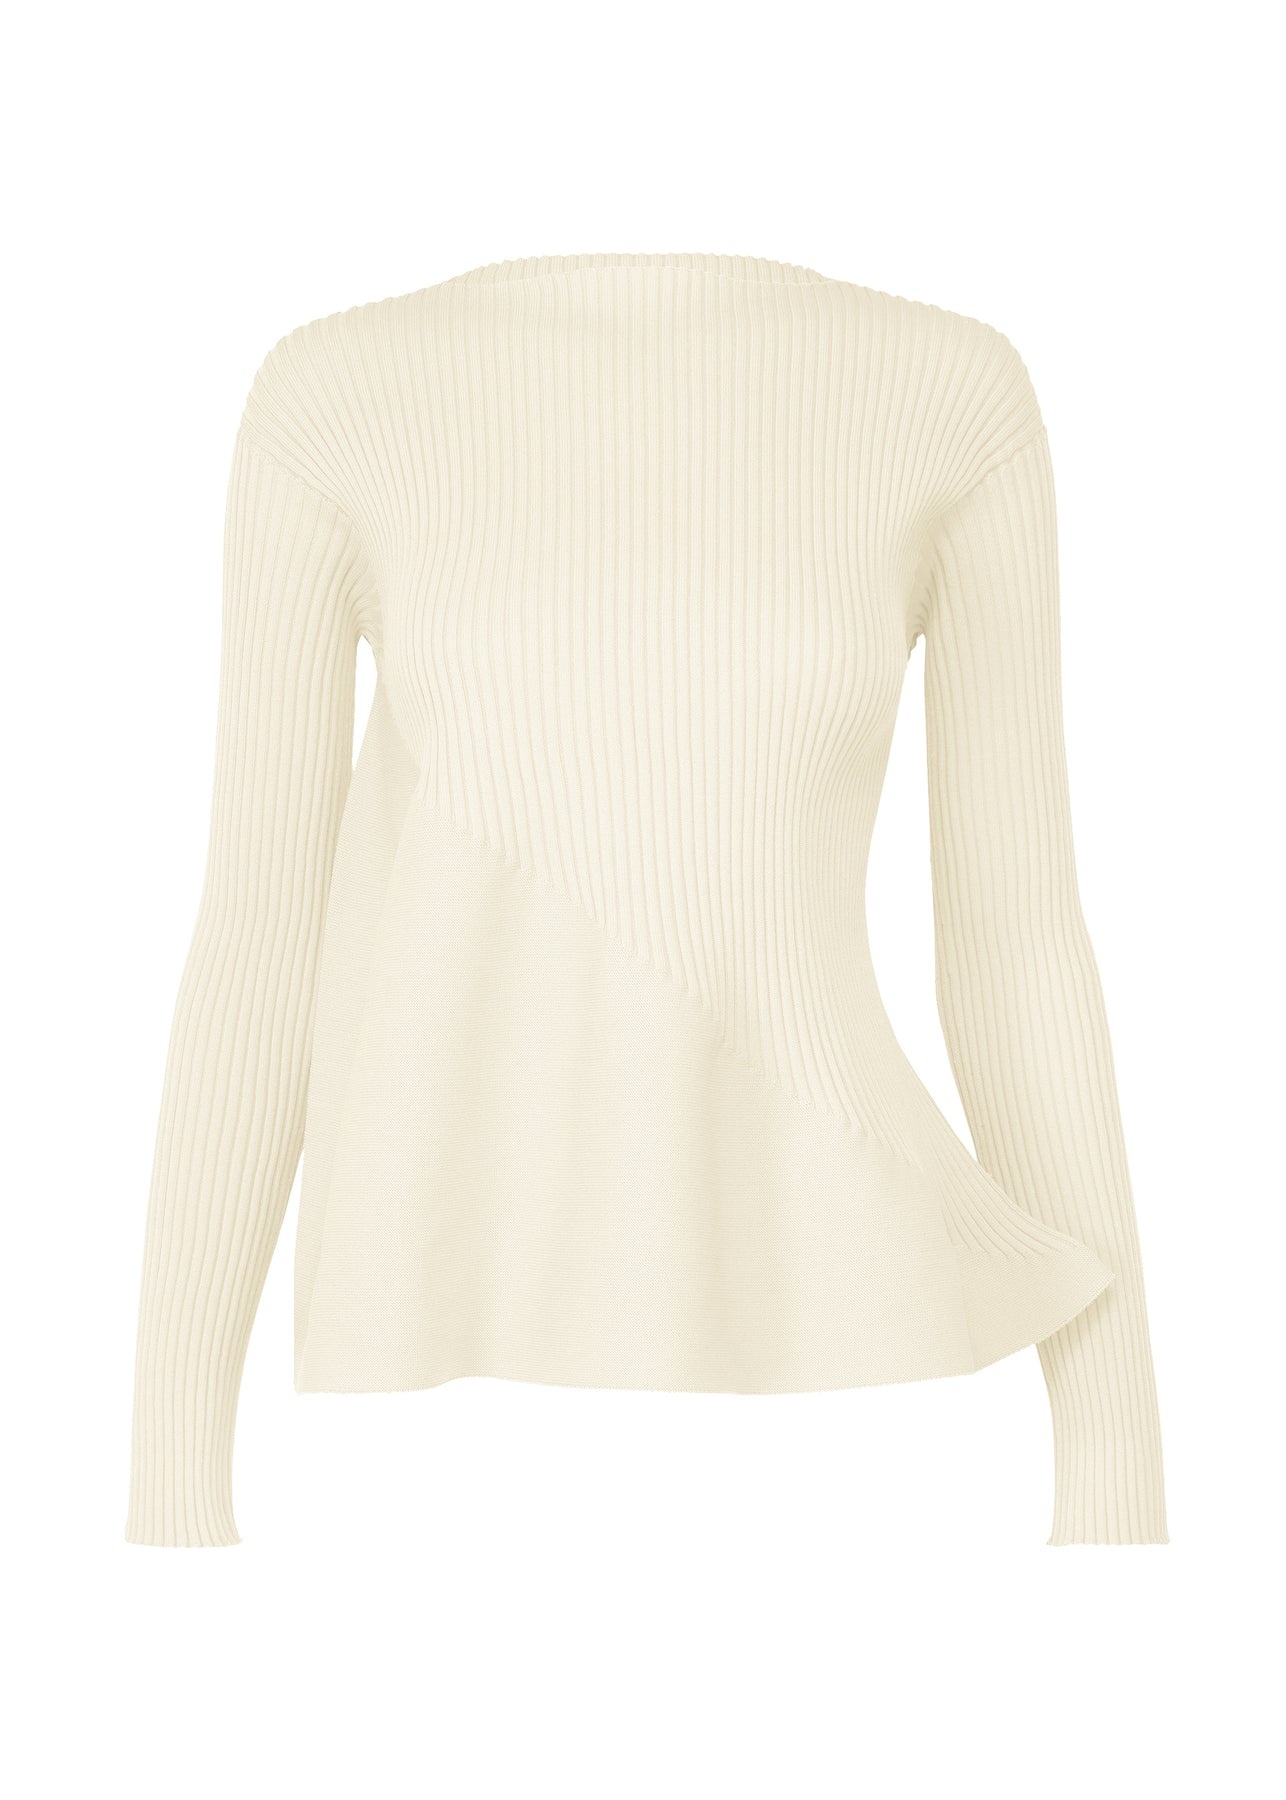 CONTRAST KNIT TOP - 1